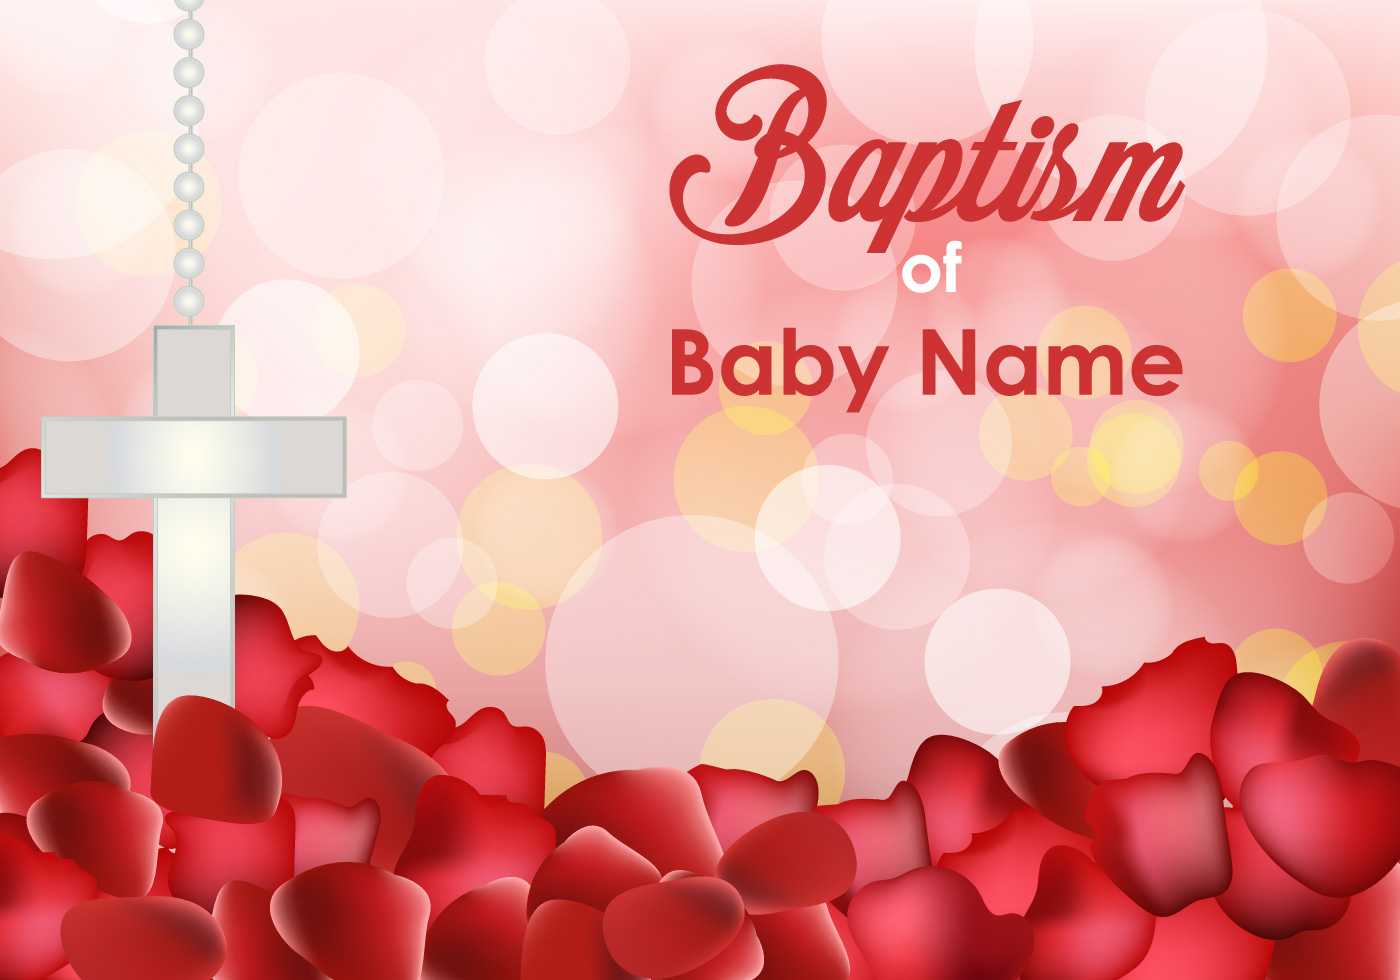 Baptism Invitation Templates – Download Free Vectors Pertaining To Christening Banner Template Free